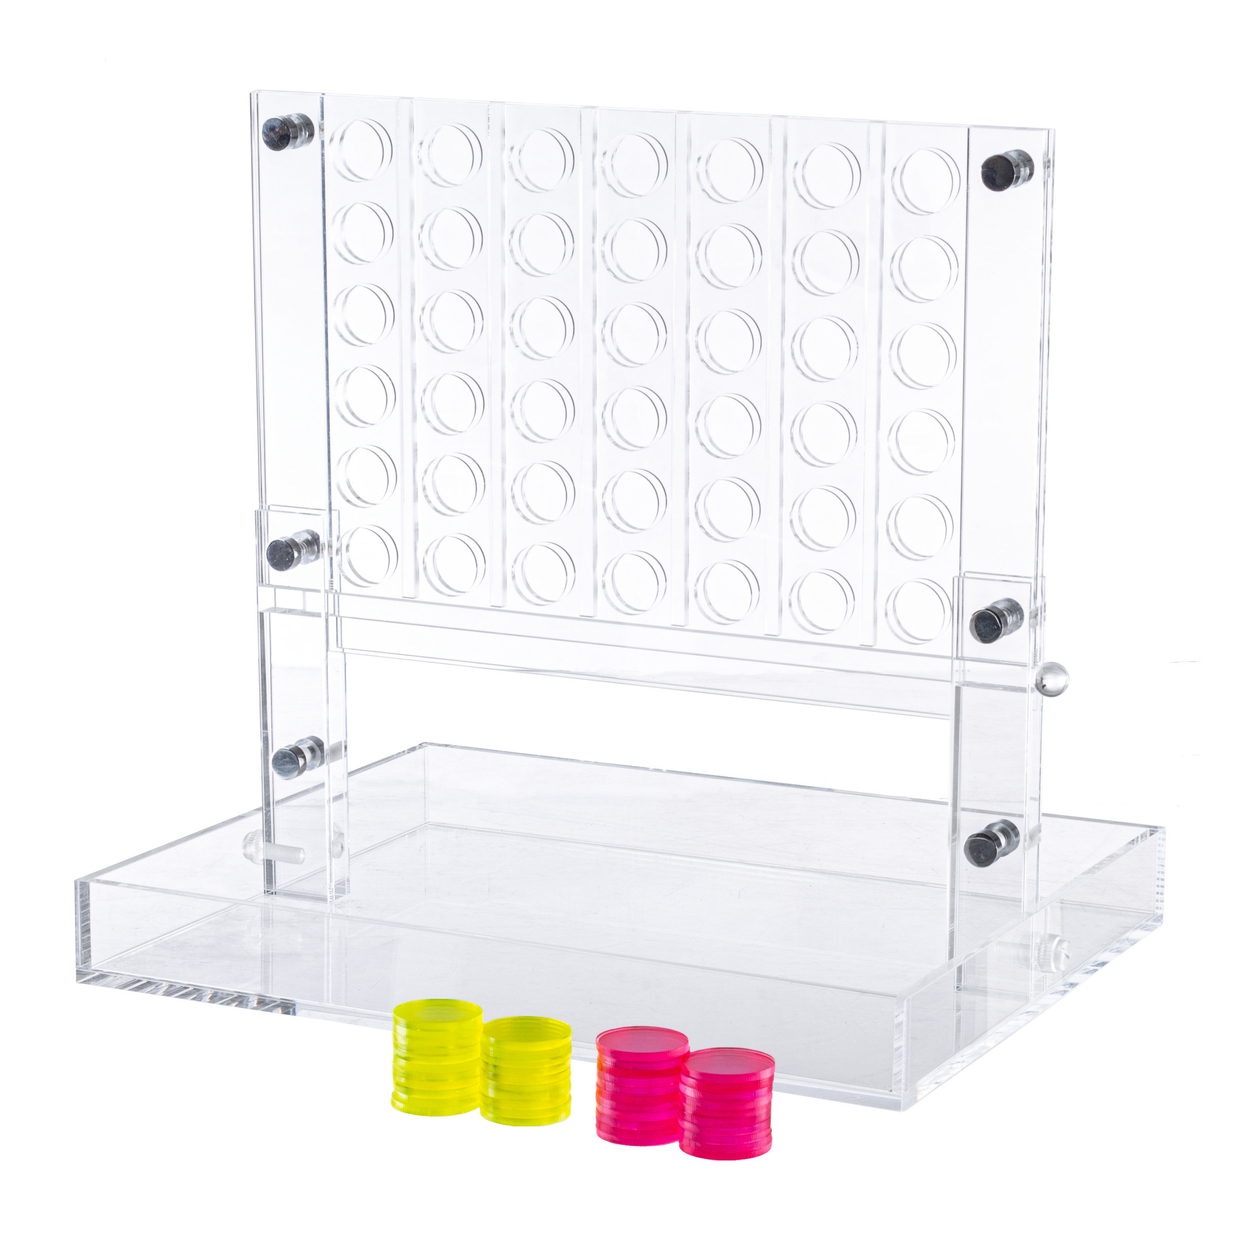 Acrylic Family Game Four In A Row Pink And Yellow Classic Fun